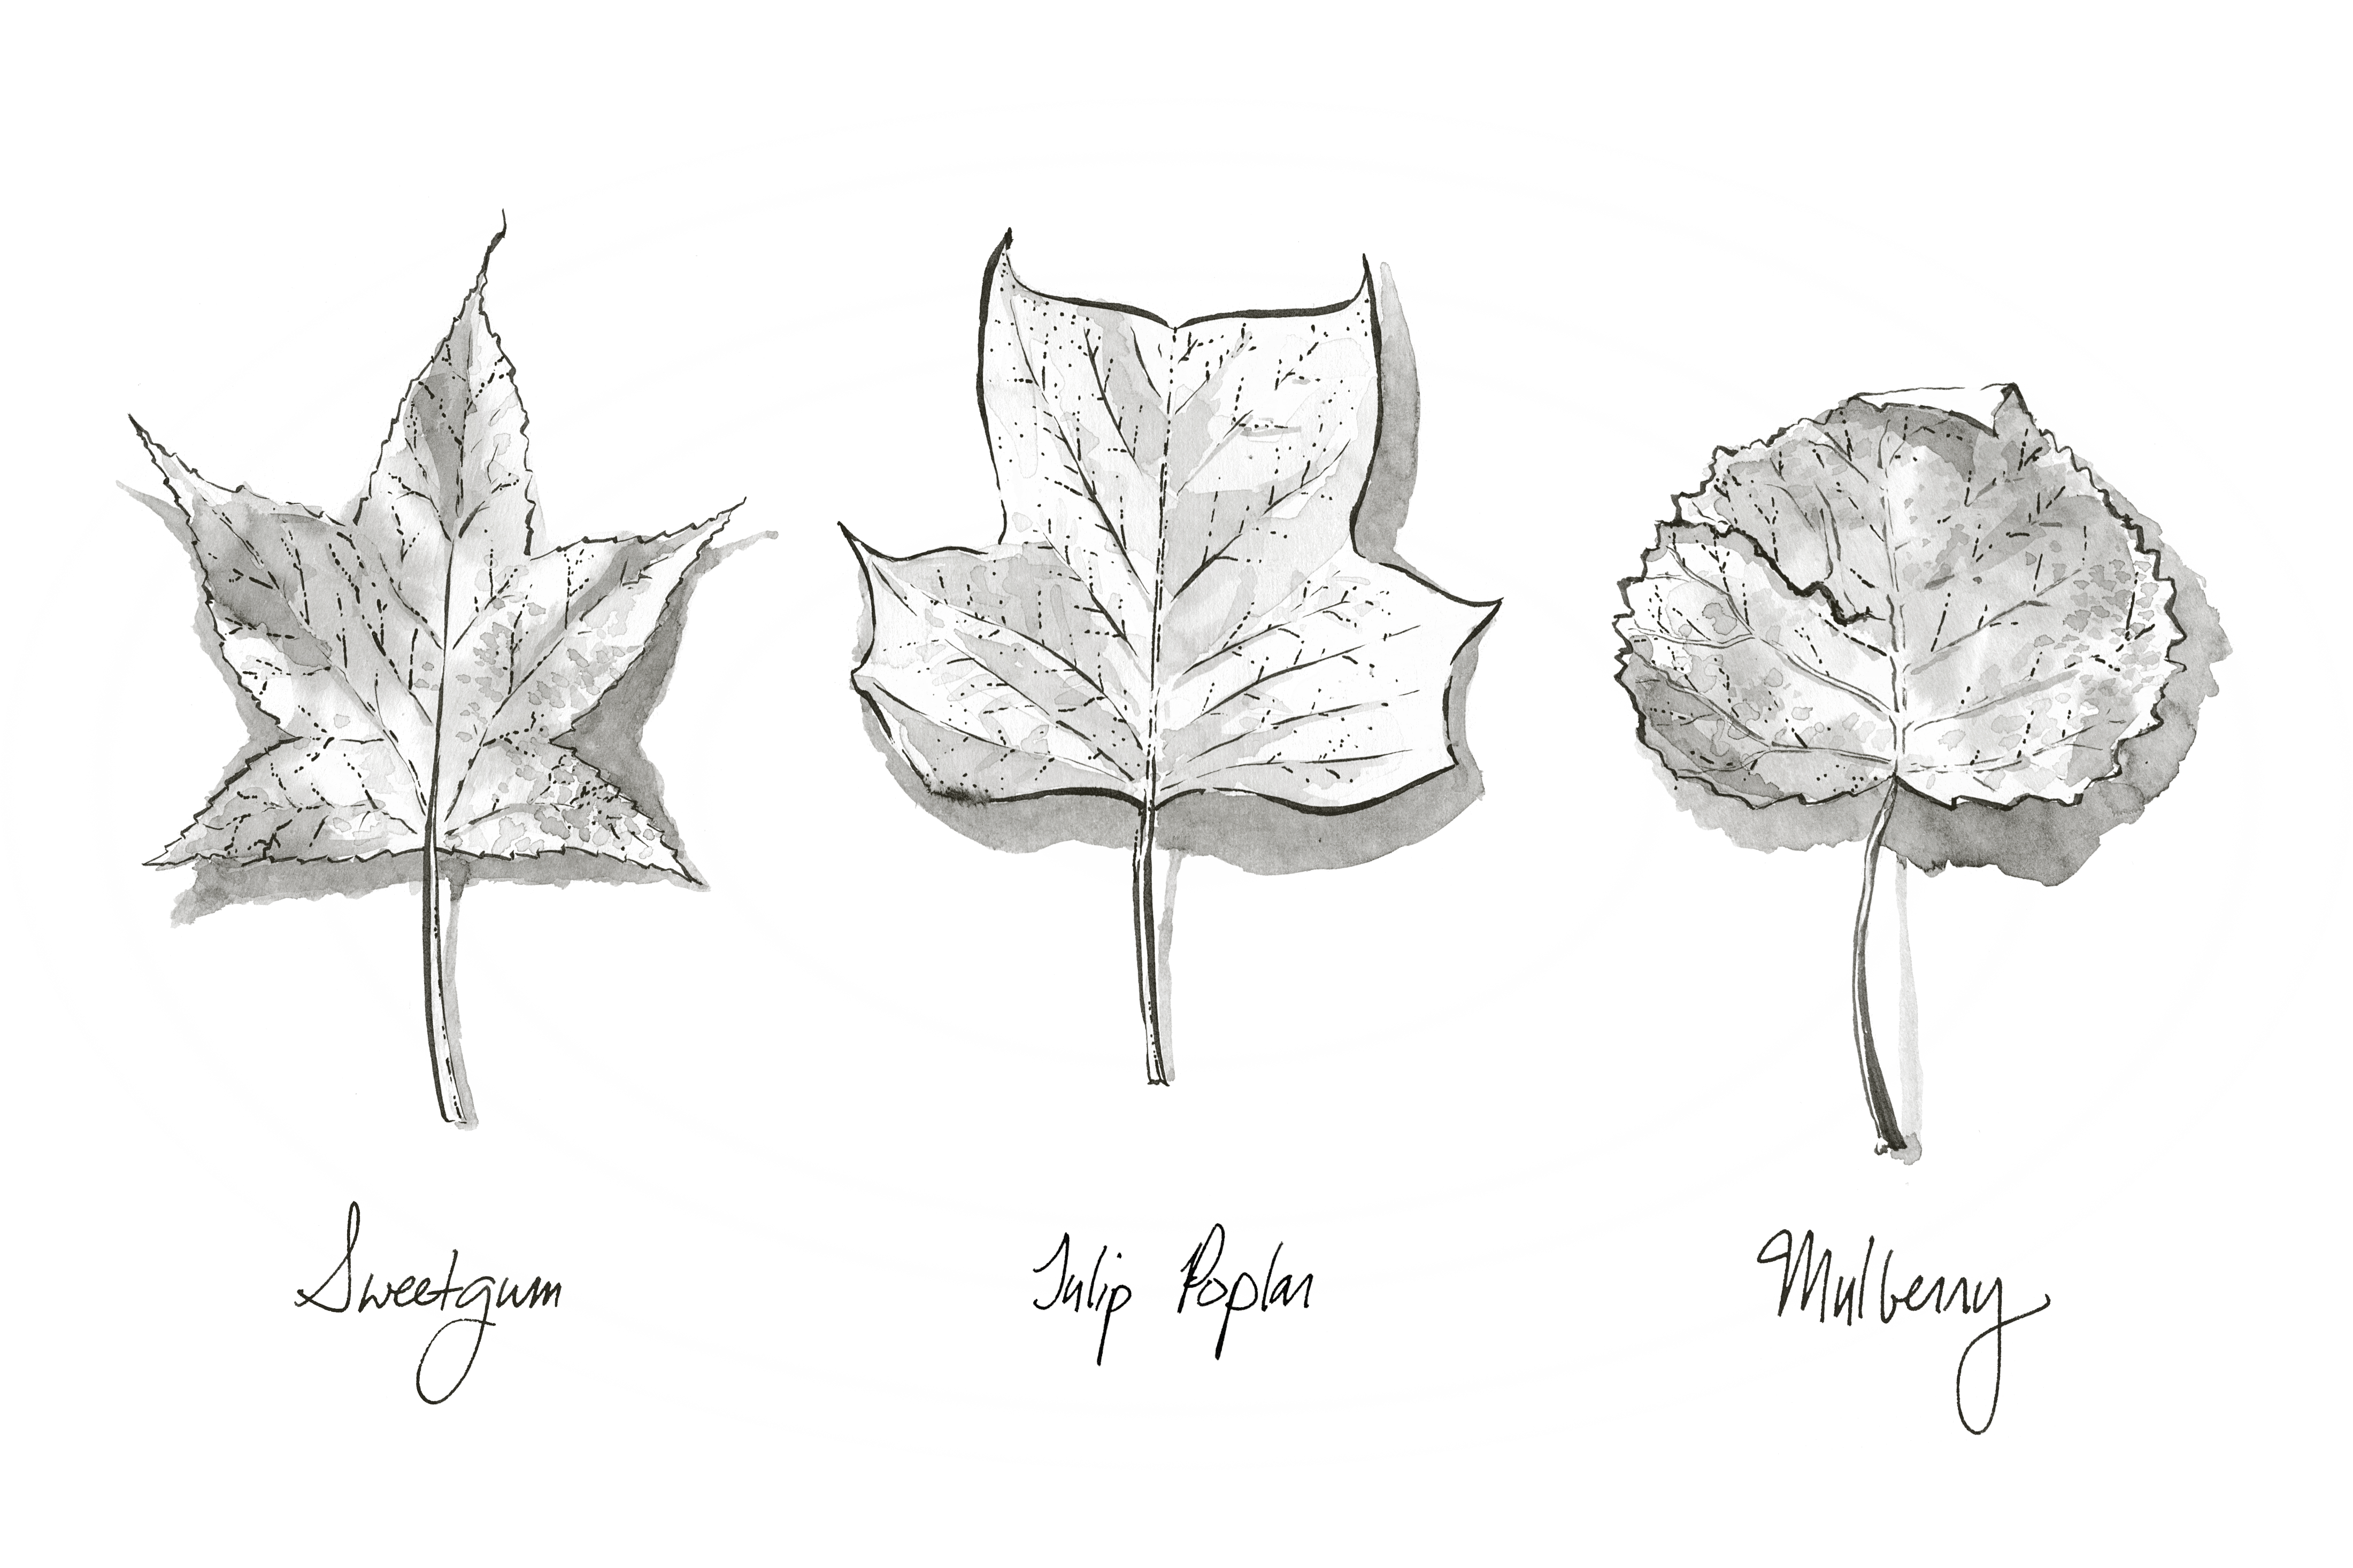 Ink drawing of three tree leaves: Sweetgum, Tulip Poplar, and Mulberry